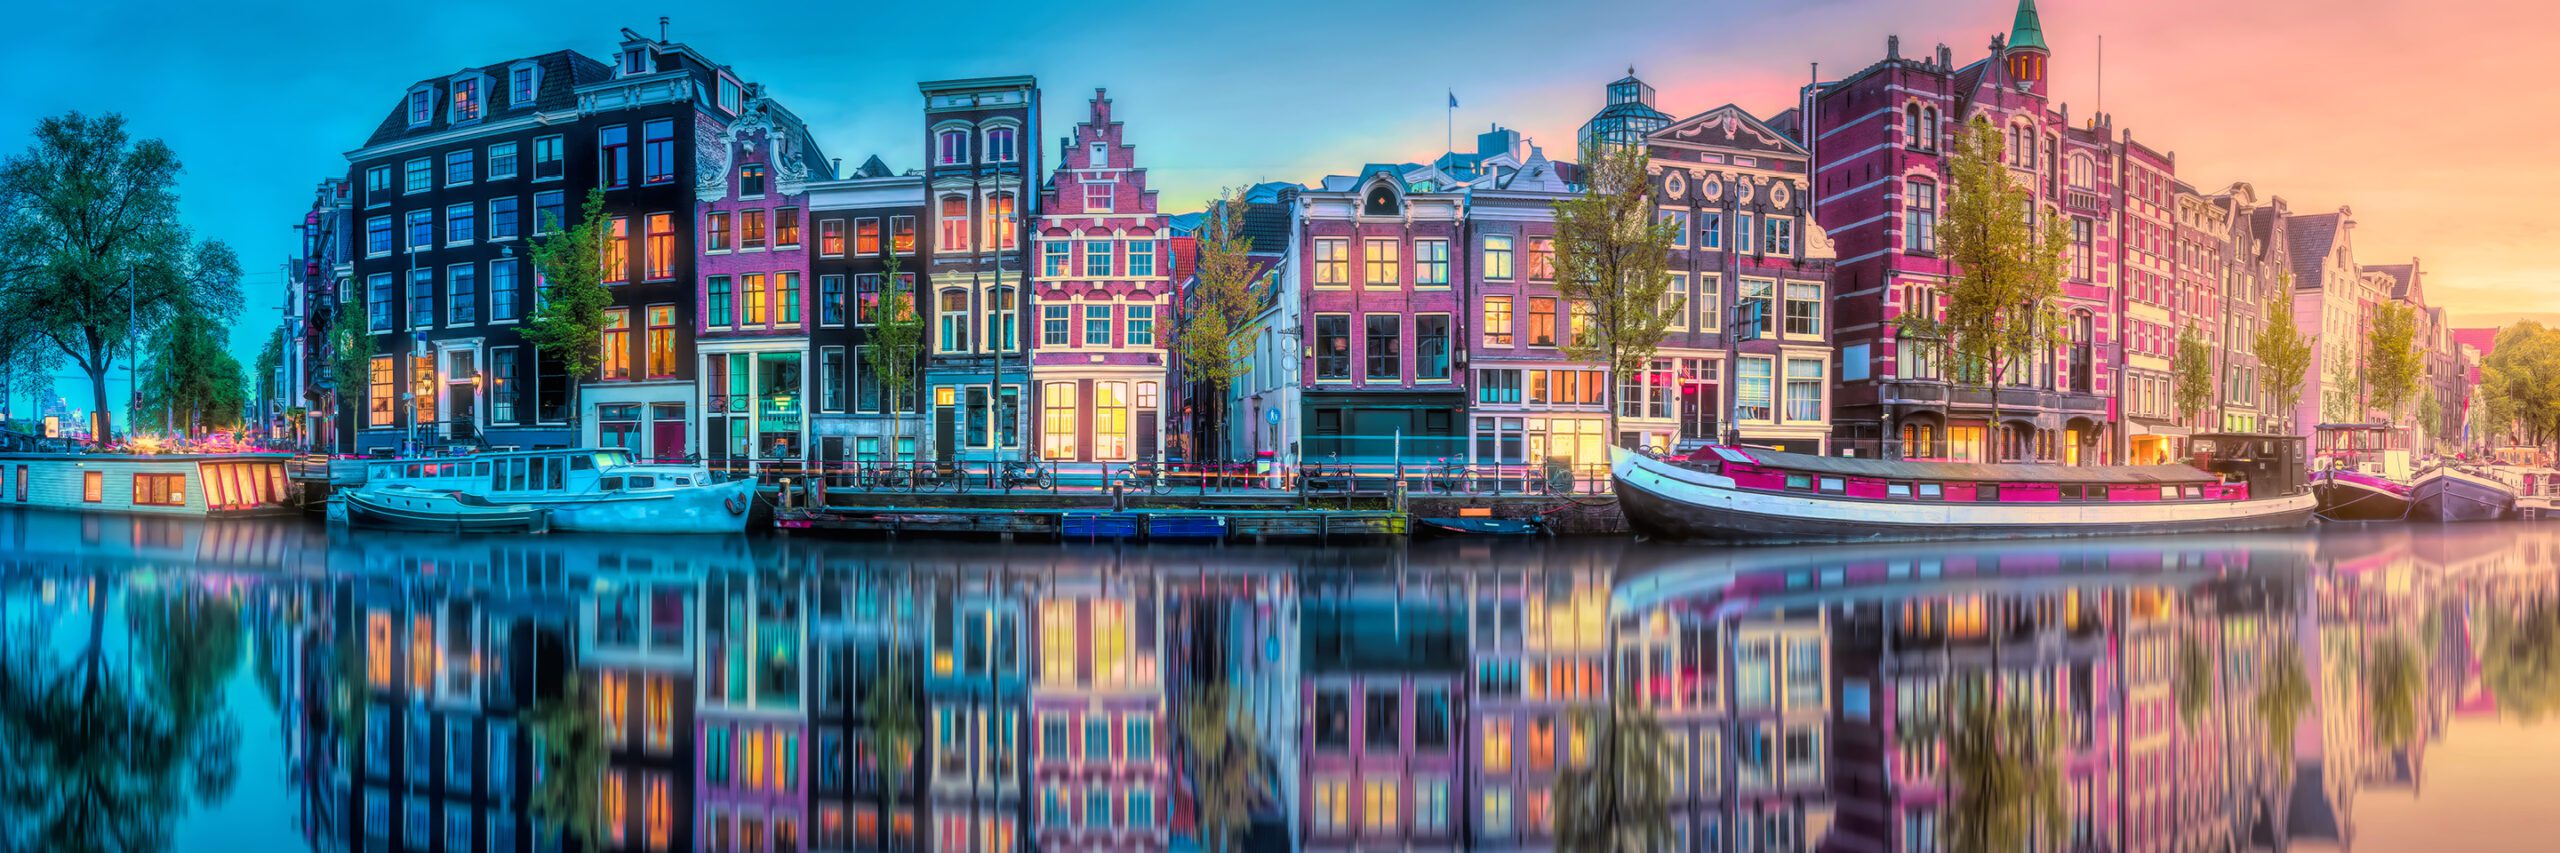 Kayaking through Amsterdam's picturesque canals, surrounded by vibrant, colorful houses at sunset - Active & Discovery on the Rhine - Avalon Waterways